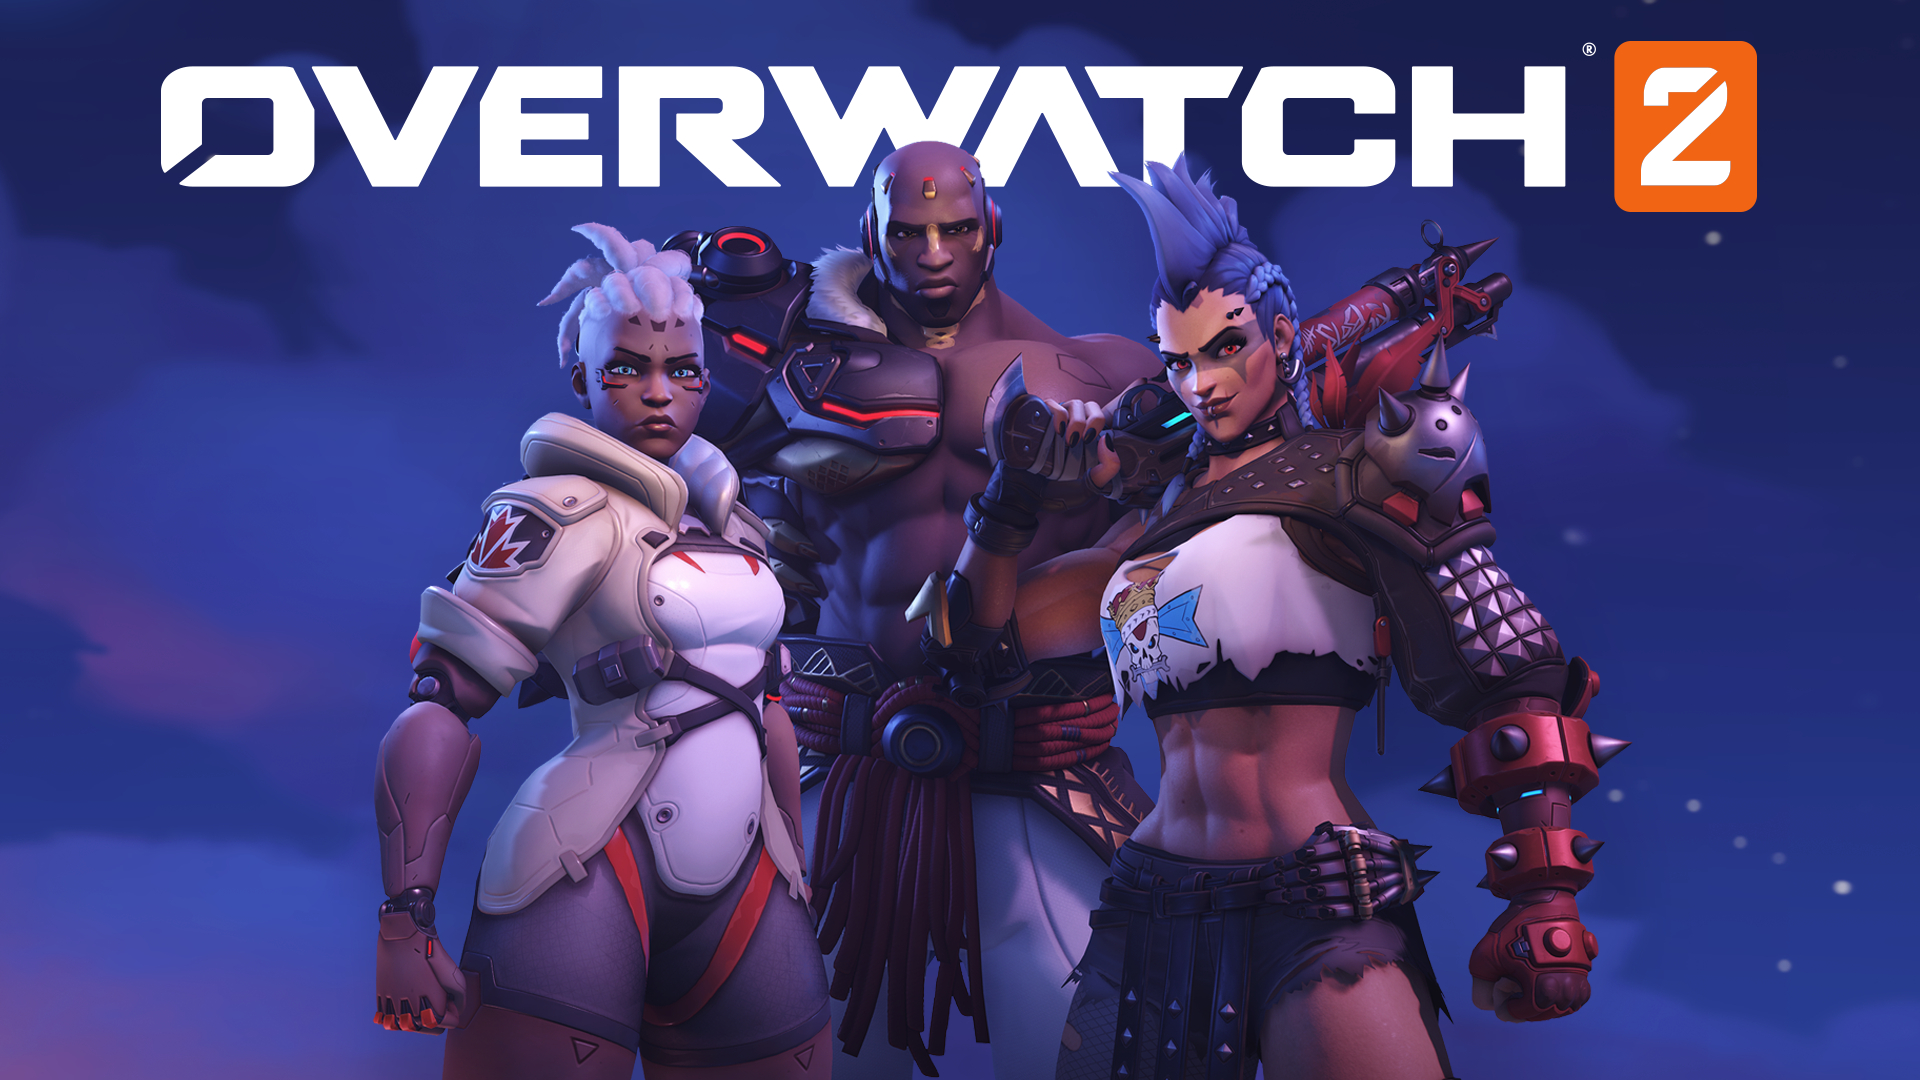 Overwatch 2 early access launching October 4 as free-to-play